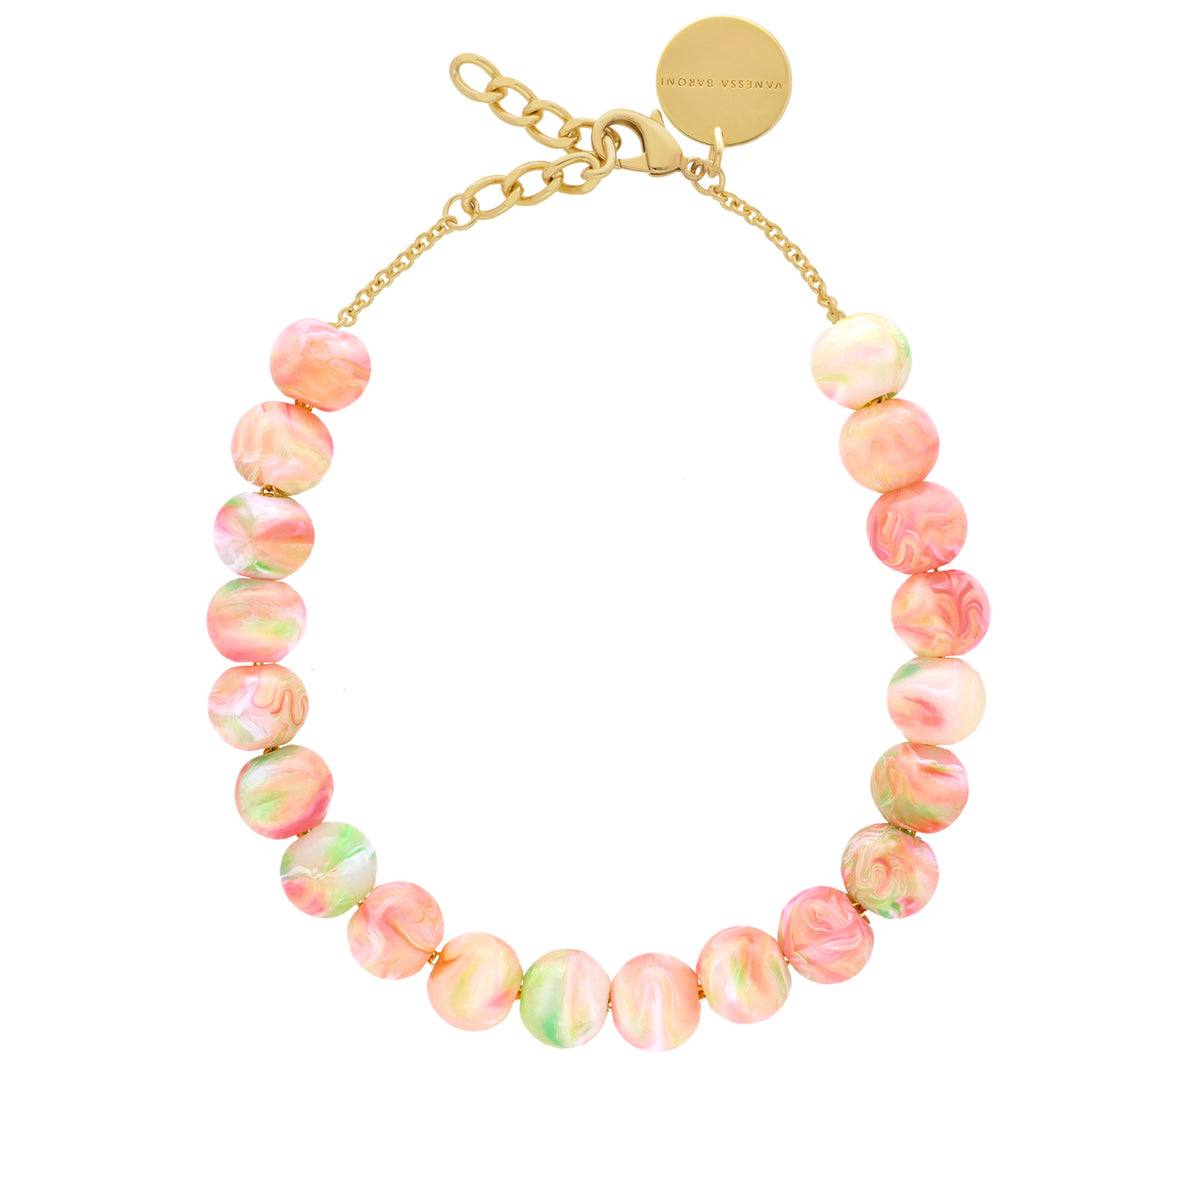 Small Beads Necklace Short Summer Vibe